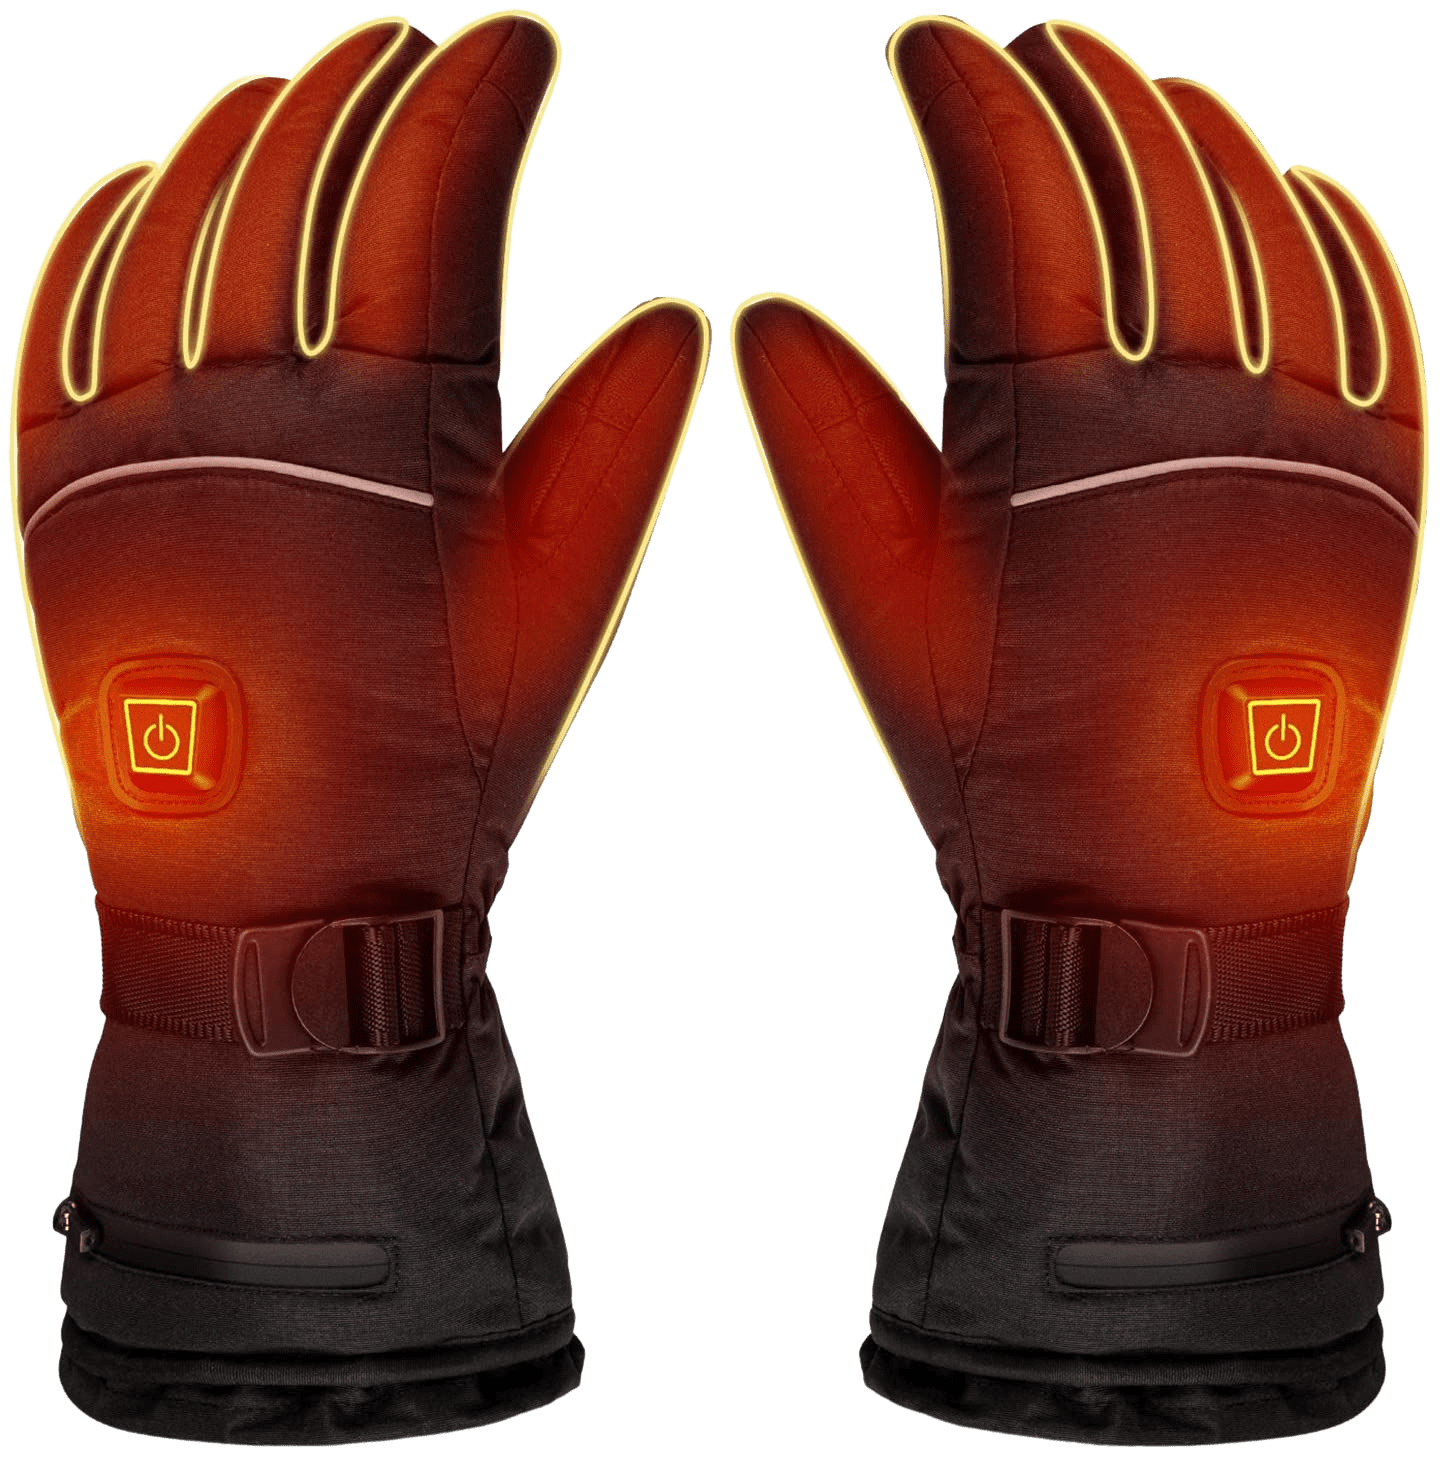 LUWATT Heated Gloves, 2020 Newest Version Battery Powered Three Temperature Settings Electric Heat Resistant Gloves for Men Women for Sports Outdoors Climb Hiking Skiing Hunting and Winter Ha - Home Decor Gifts and More